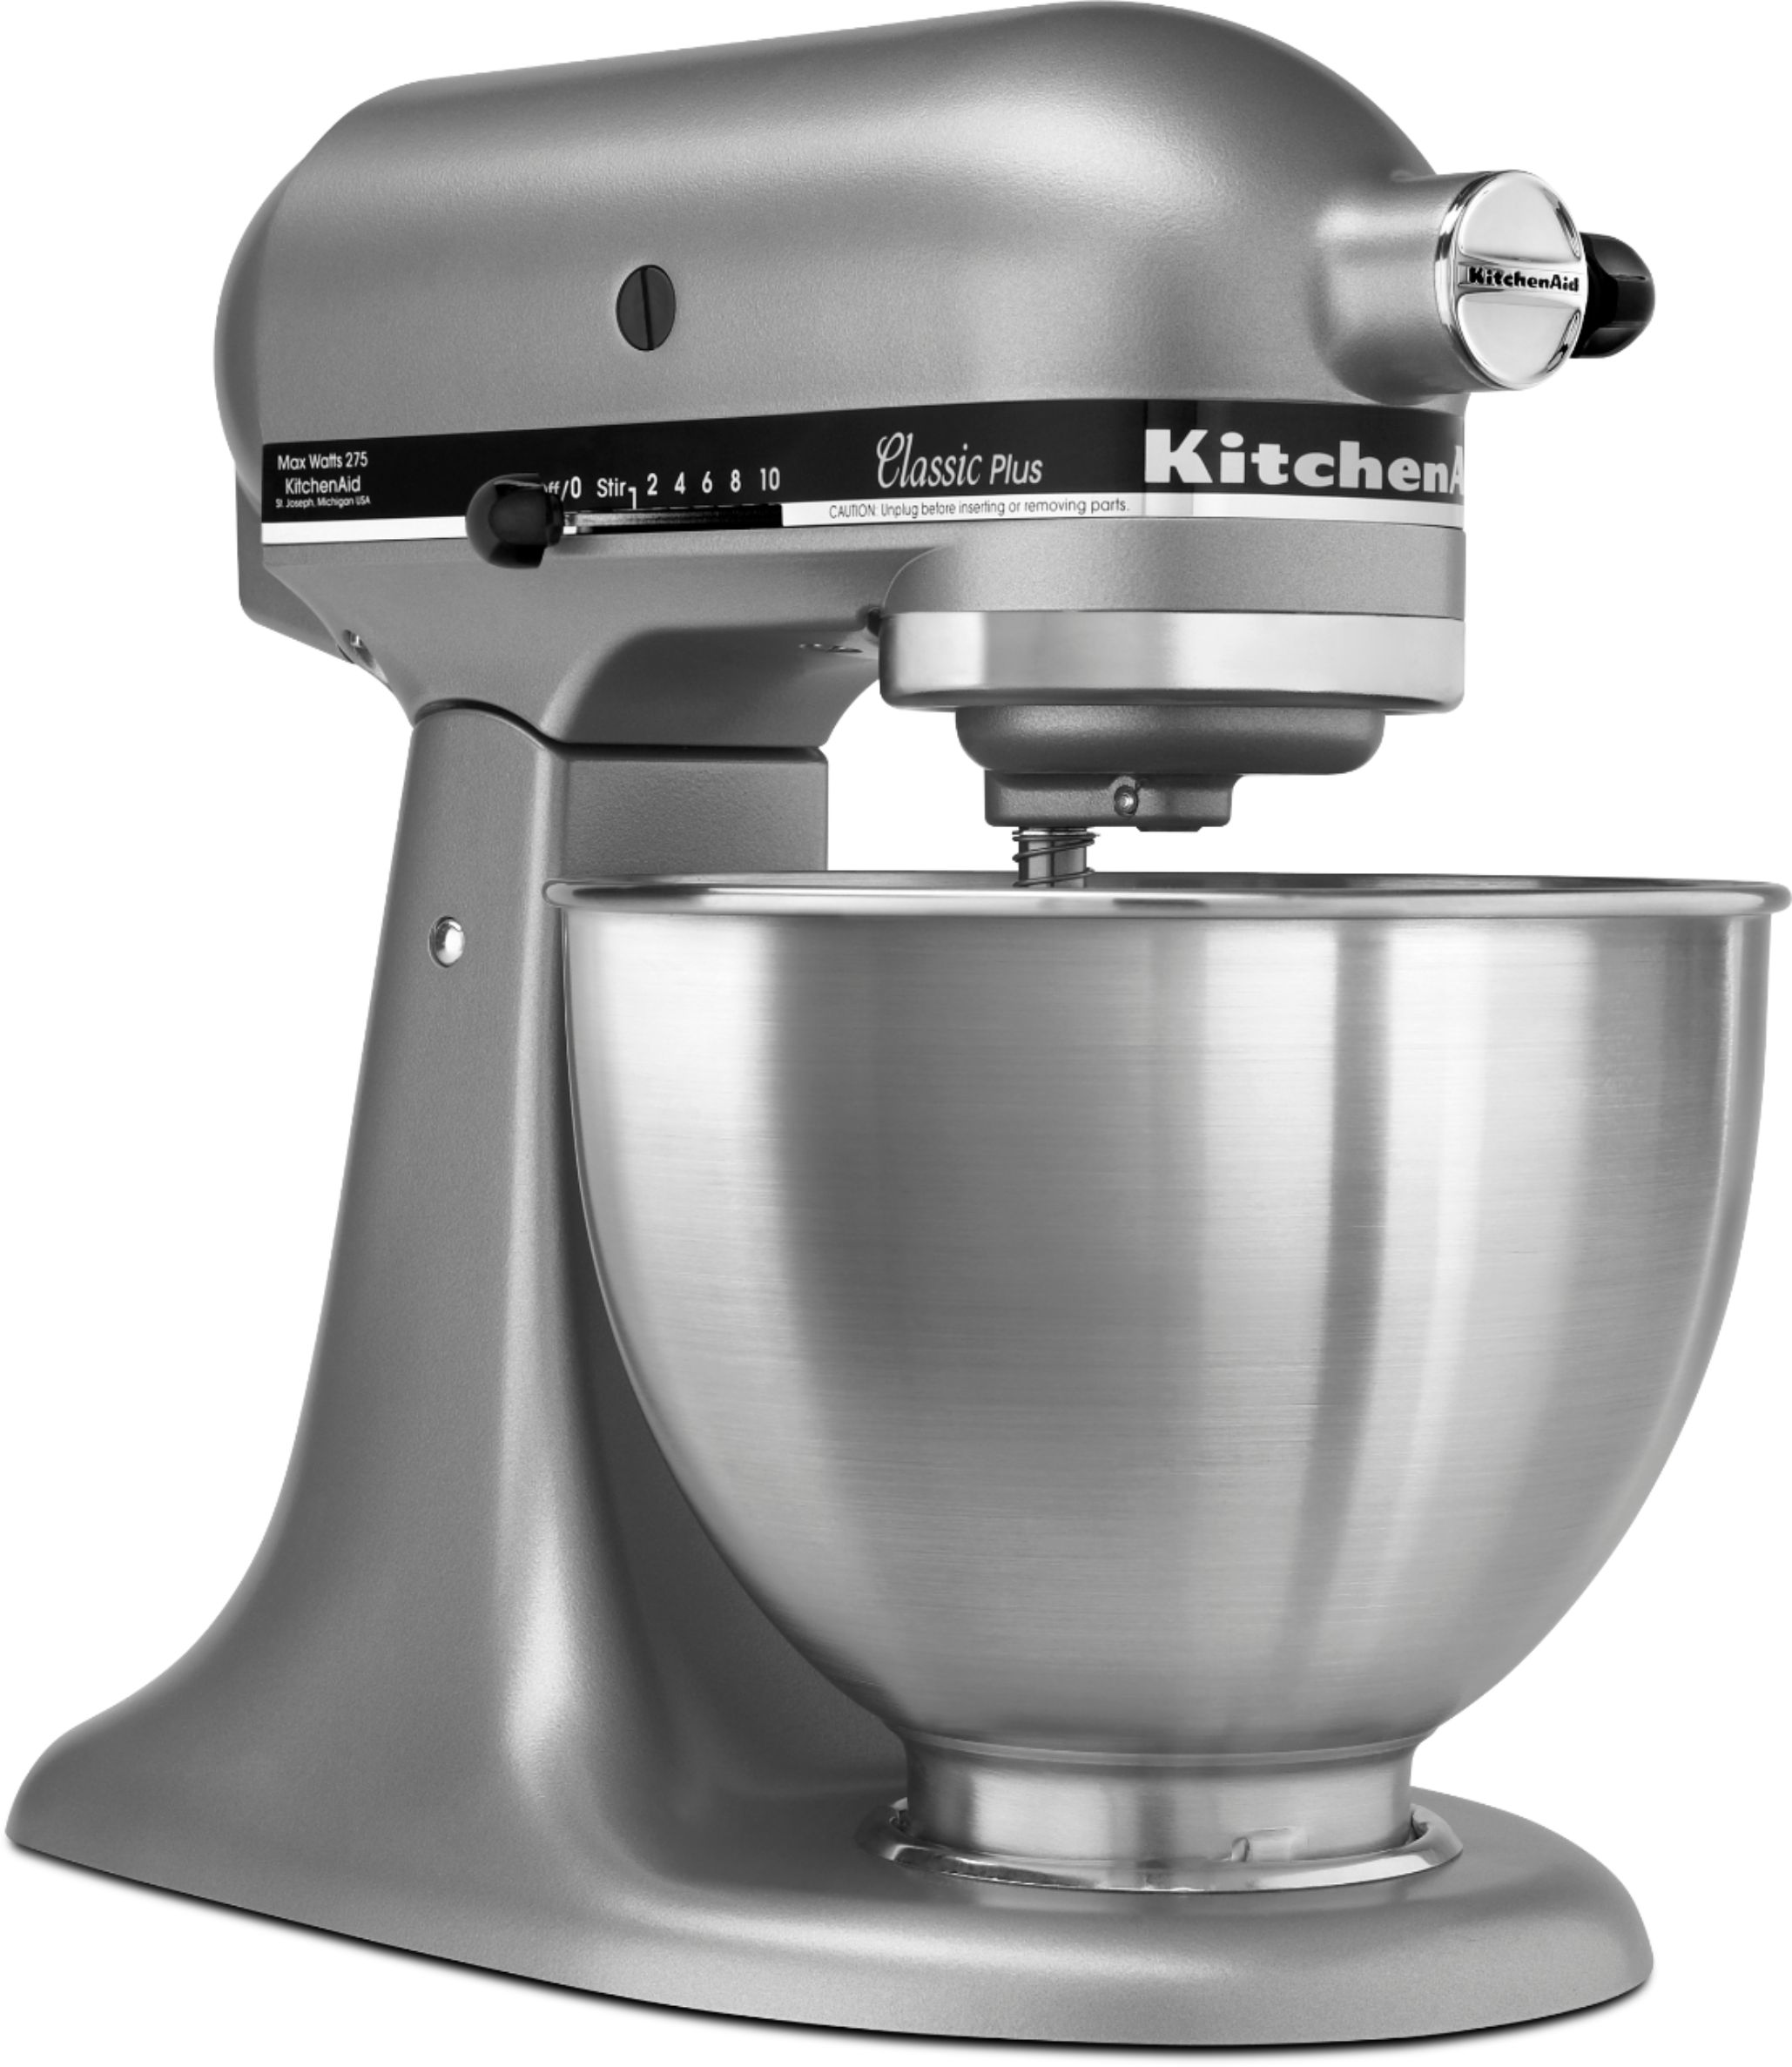 KitchenAid Classic Plus Stand Mixer, Tested and Reviewed